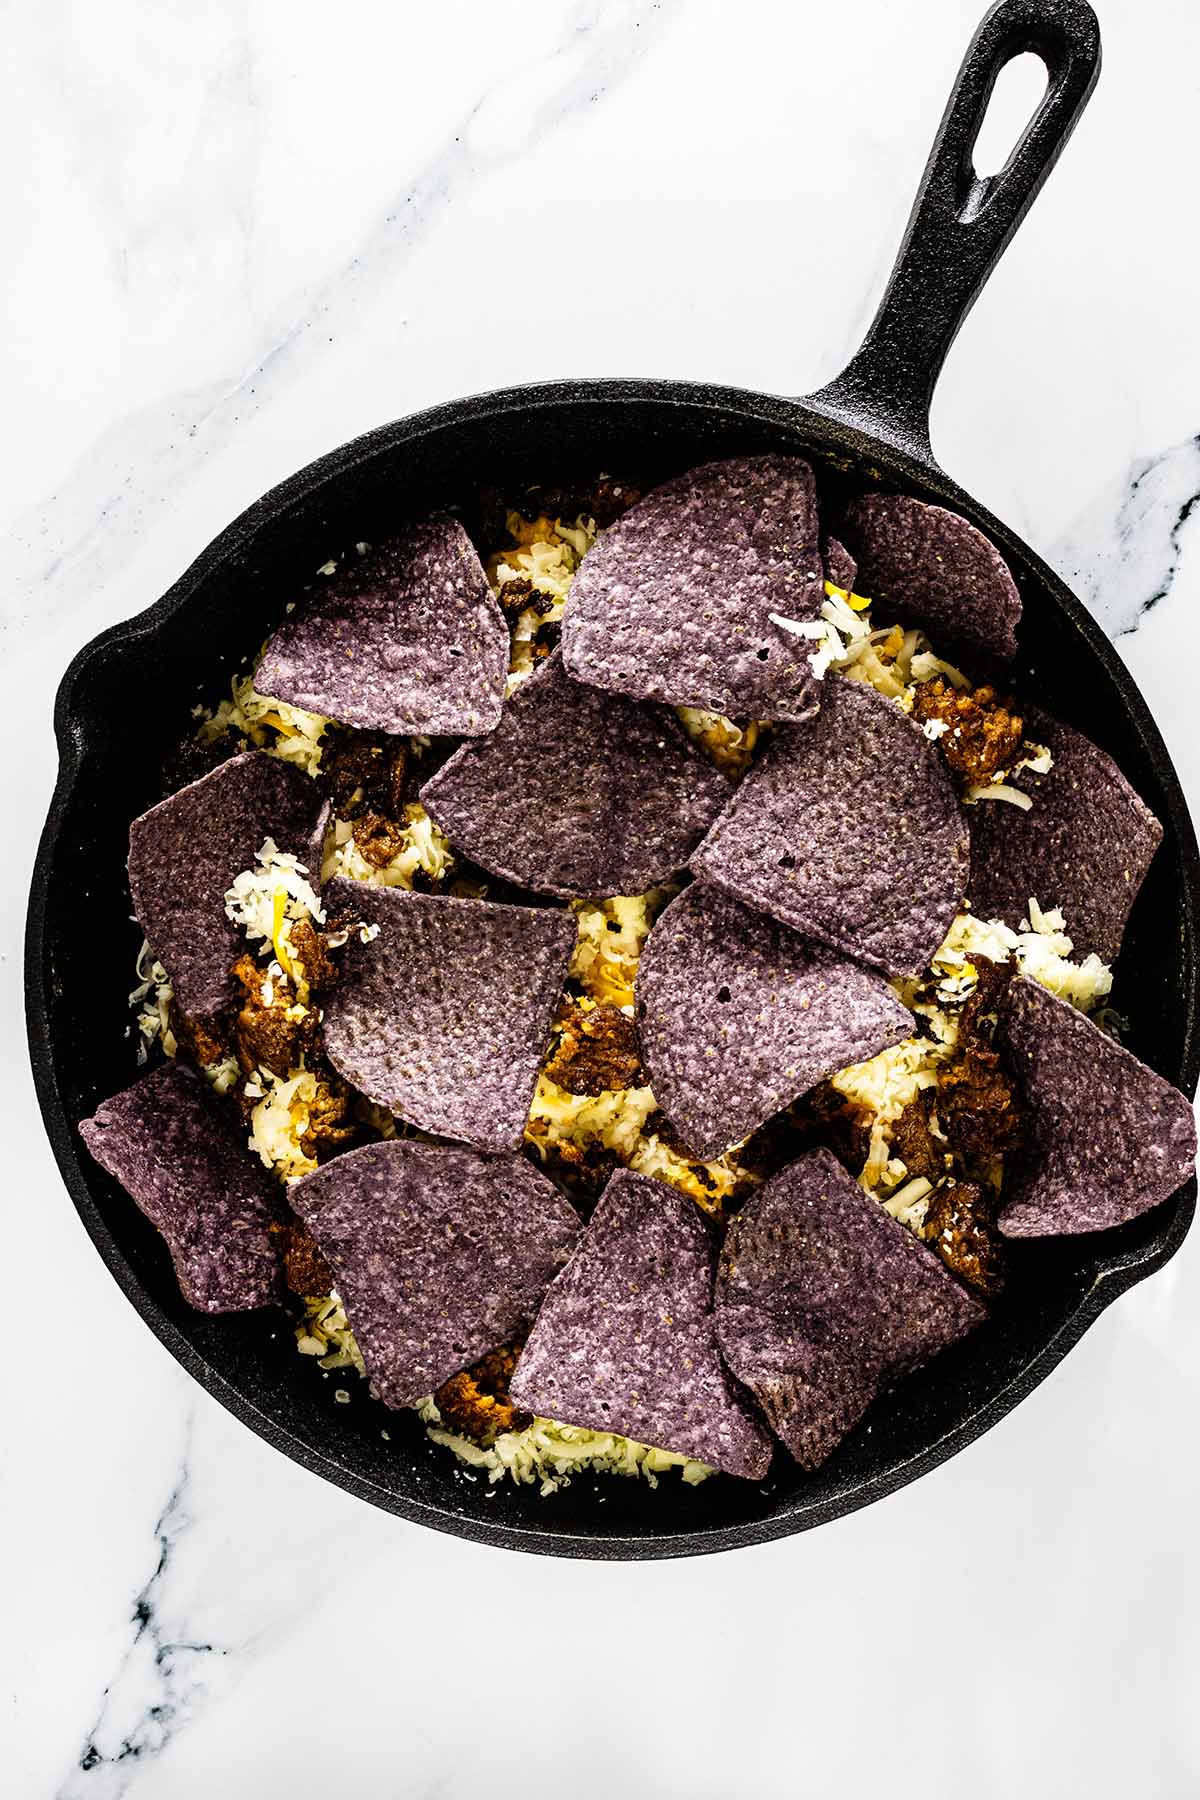 Overhead view of a layer of blue corn tortilla chips added to a skillet on a white marble background.